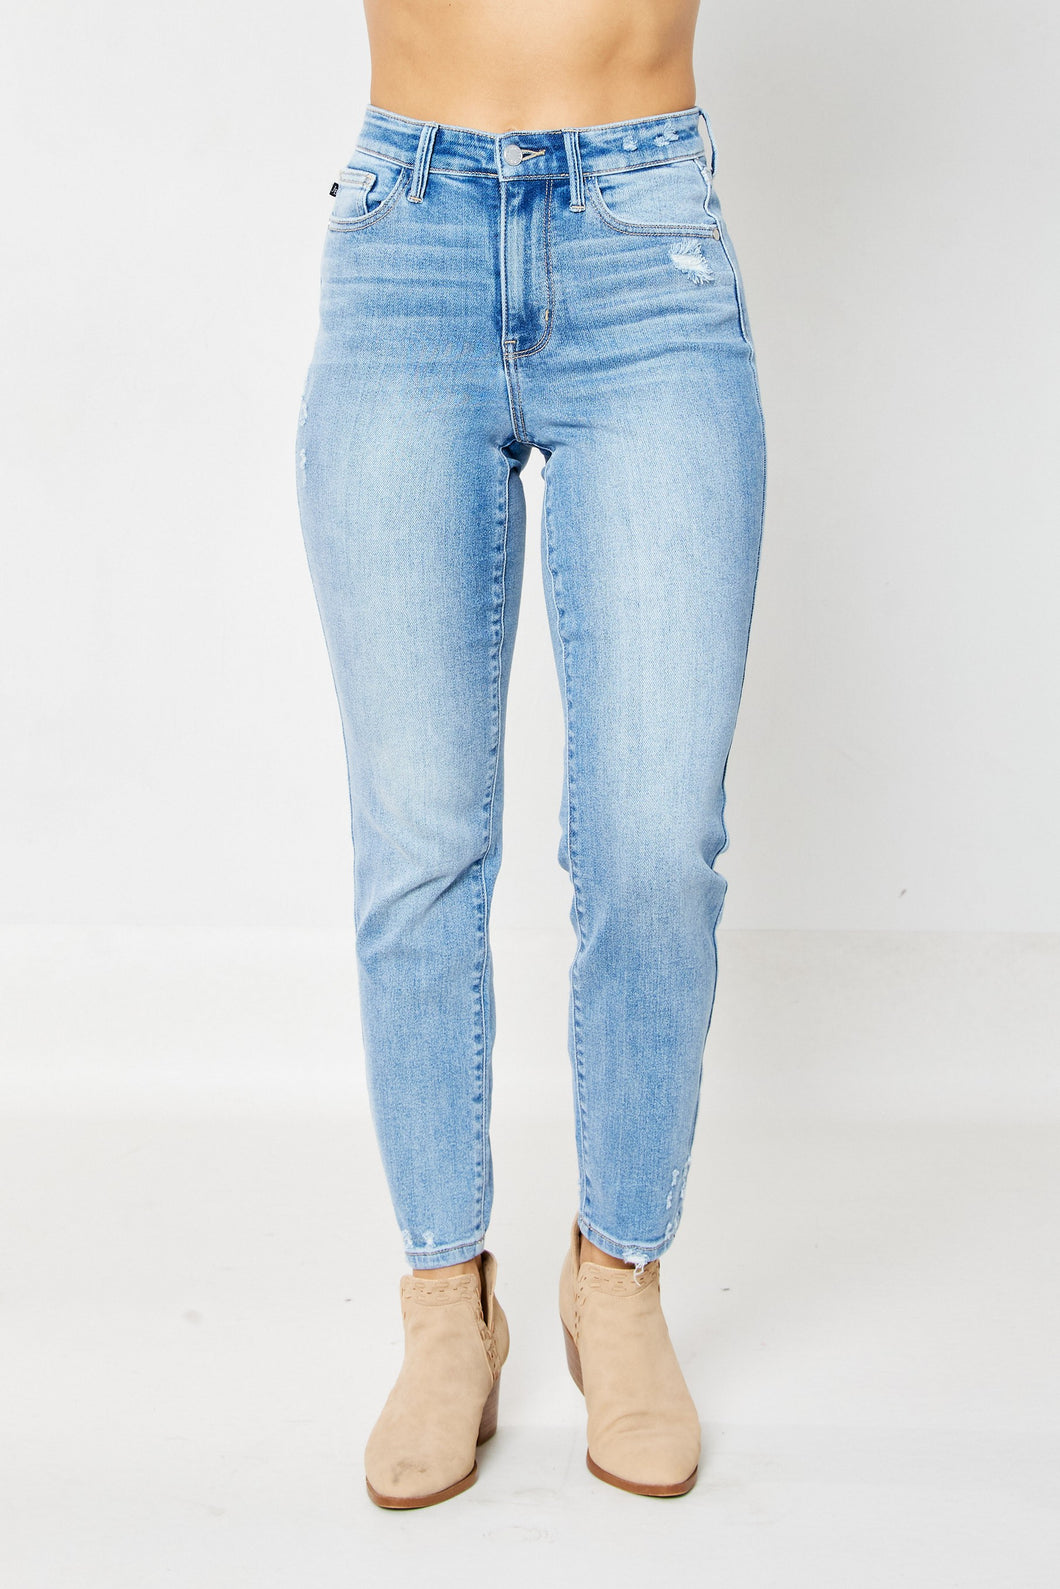 JUDY BLUE Plus Size High Rise Slight Distressing Jeans